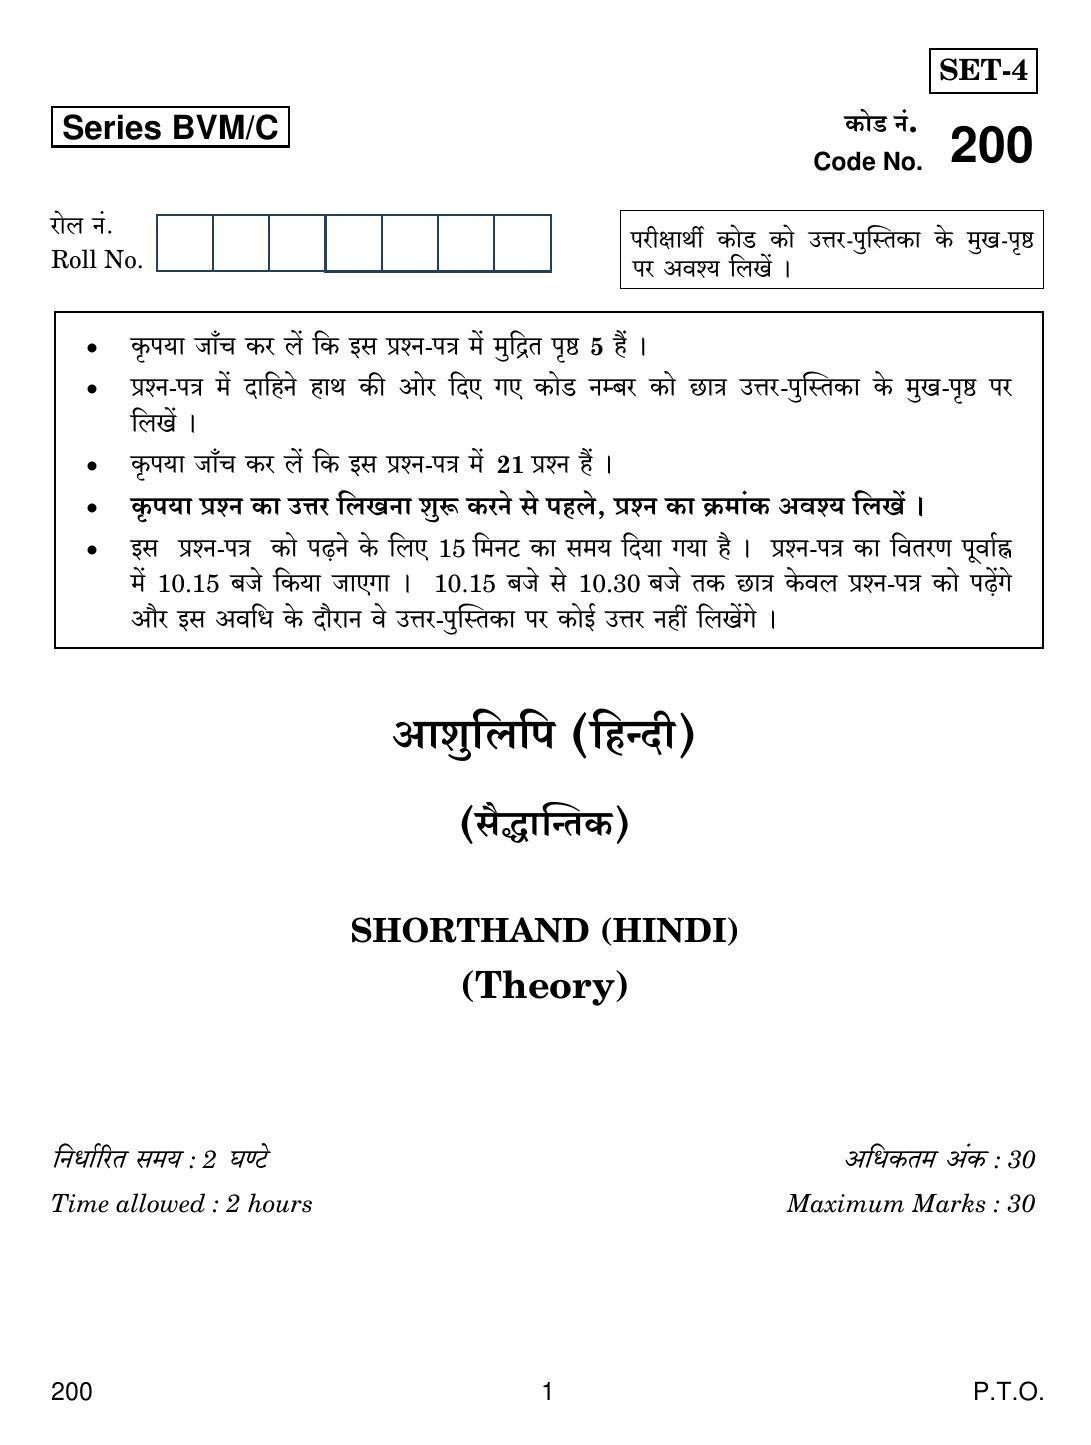 CBSE Class 12 200 SHORTHAND HINDI 2019 Compartment Question Paper - Page 1